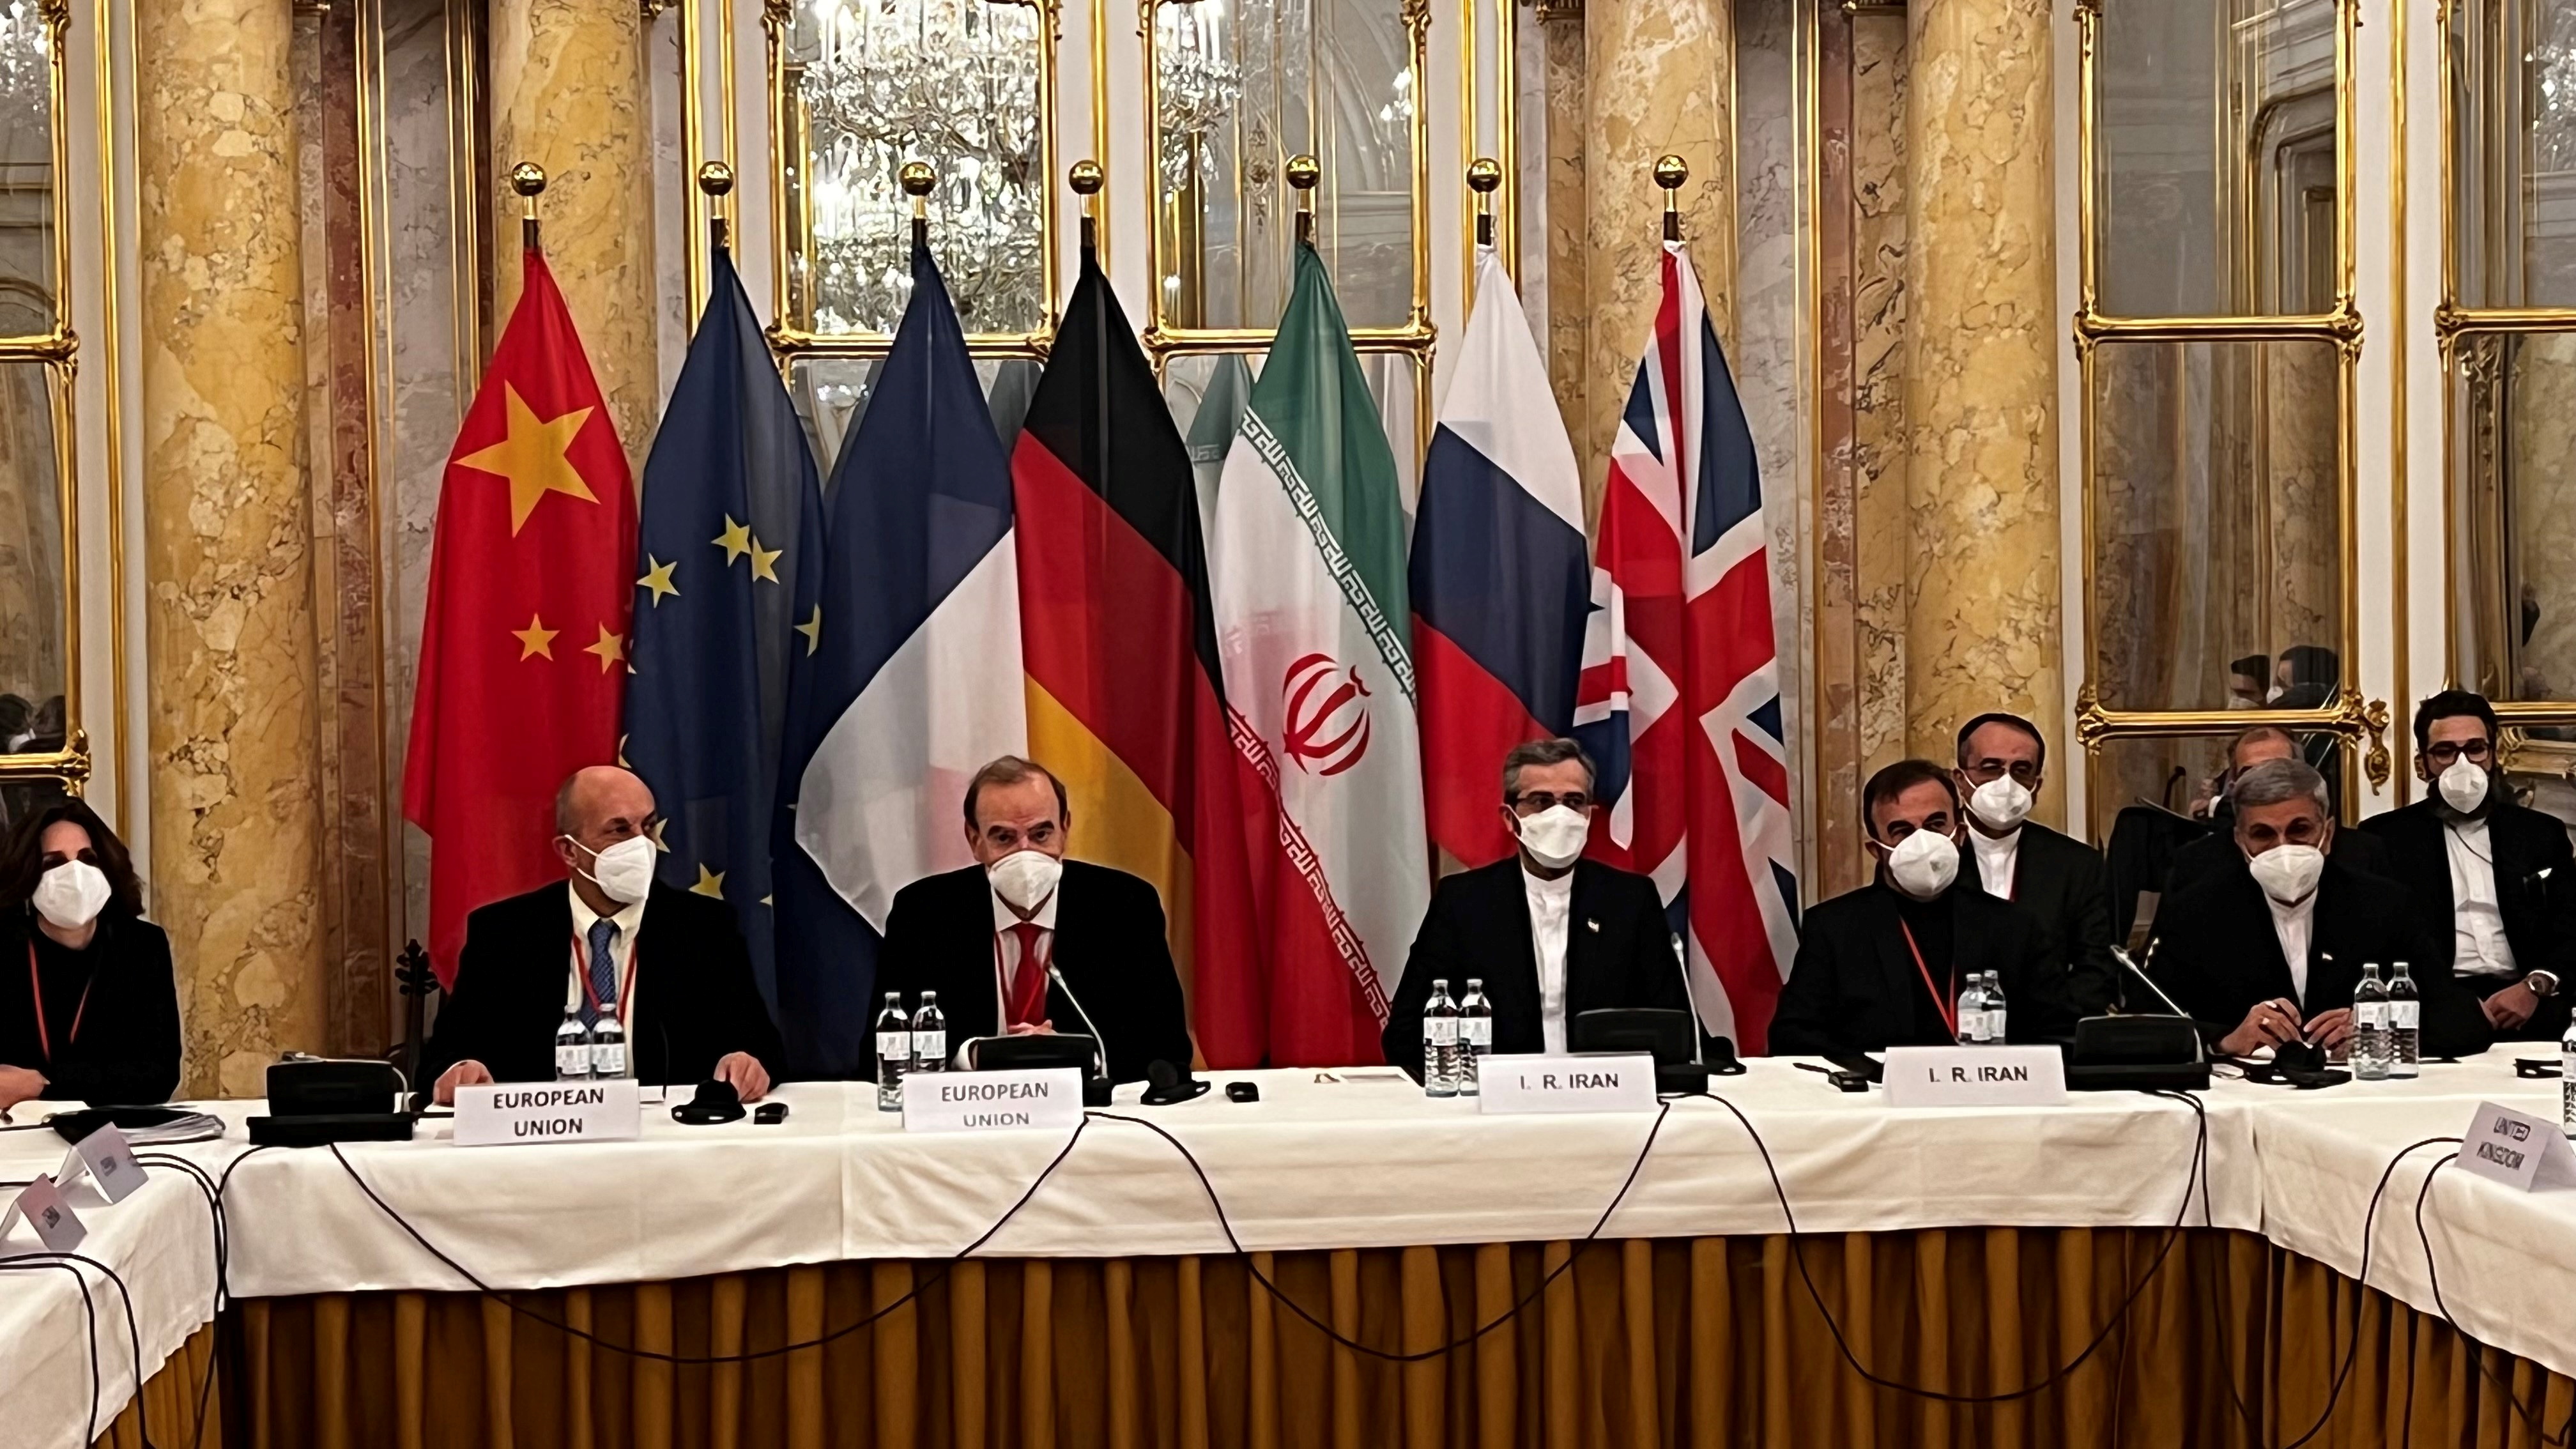 Deputy Secretary General of the European External Action Service (EEAS) Enrique Mora and Iran's chief nuclear negotiator Ali Bagheri Kani wait for the start of a meeting of the JCPOA Joint Commission in Vienna, Austria December 3, 2021. EU Delegation in Vienna/Handout via REUTERS 